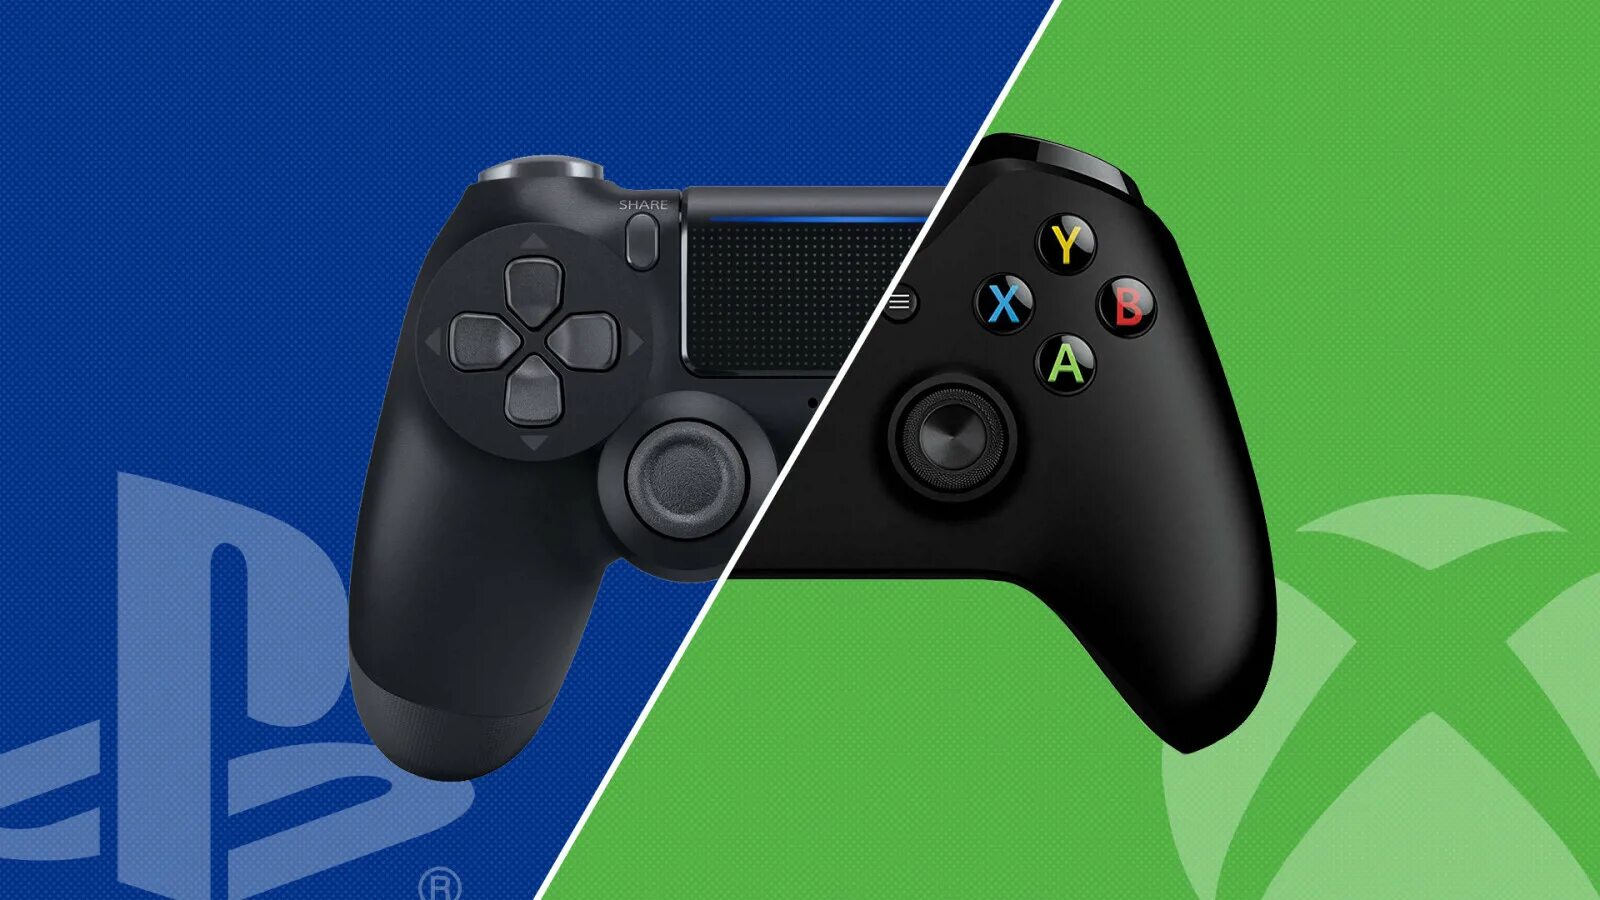 Xbox game android. Джойстик ps5 vs Xbox. Геймпад Xbox и ps5. Xbox 360 vs ps5. Xbox 5.